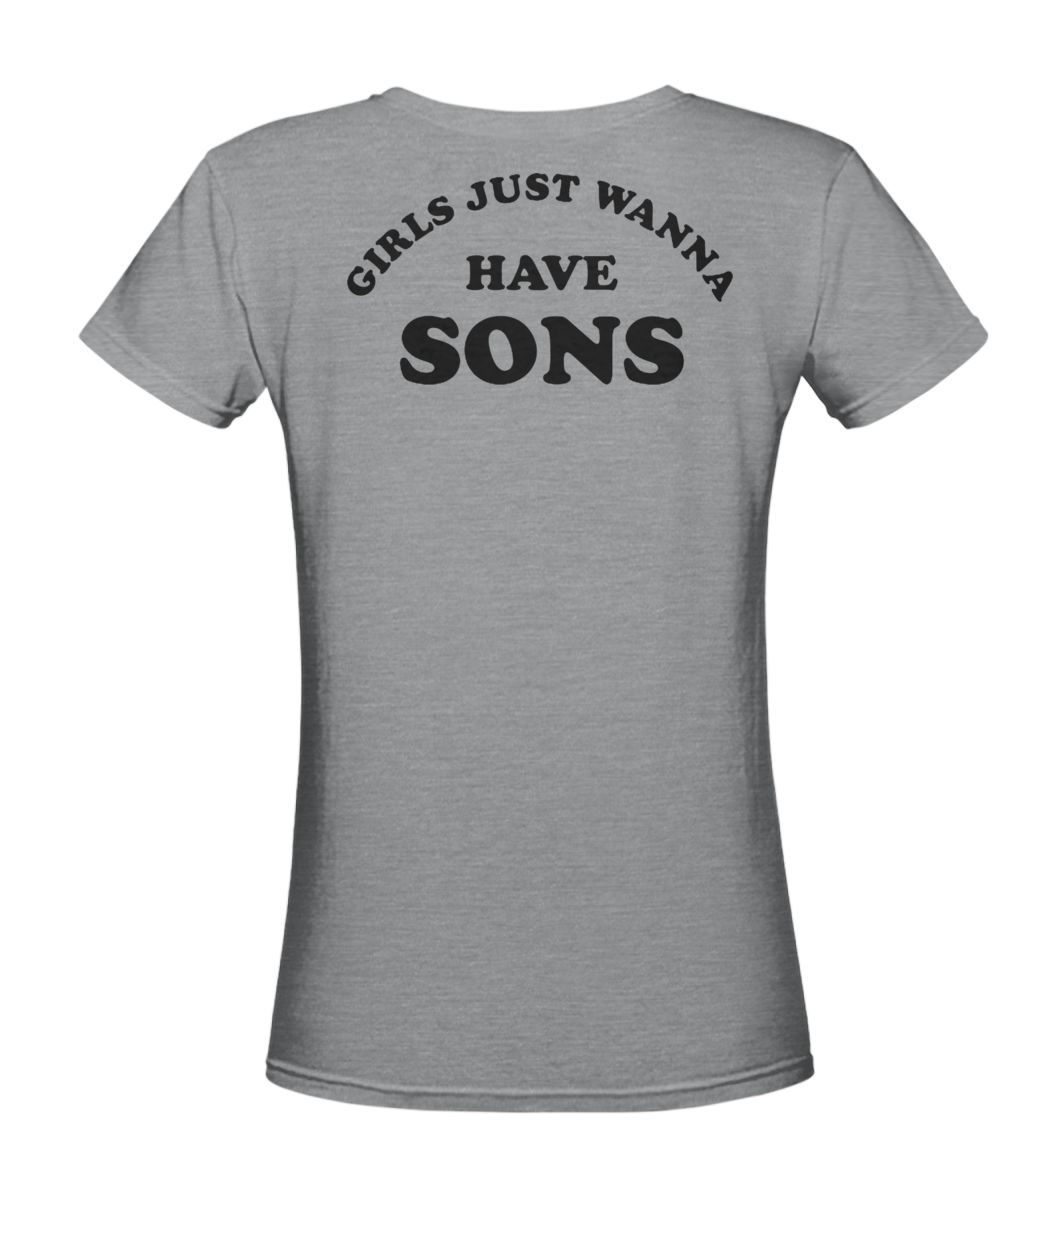 Girls just wanna have sons women's v-neck